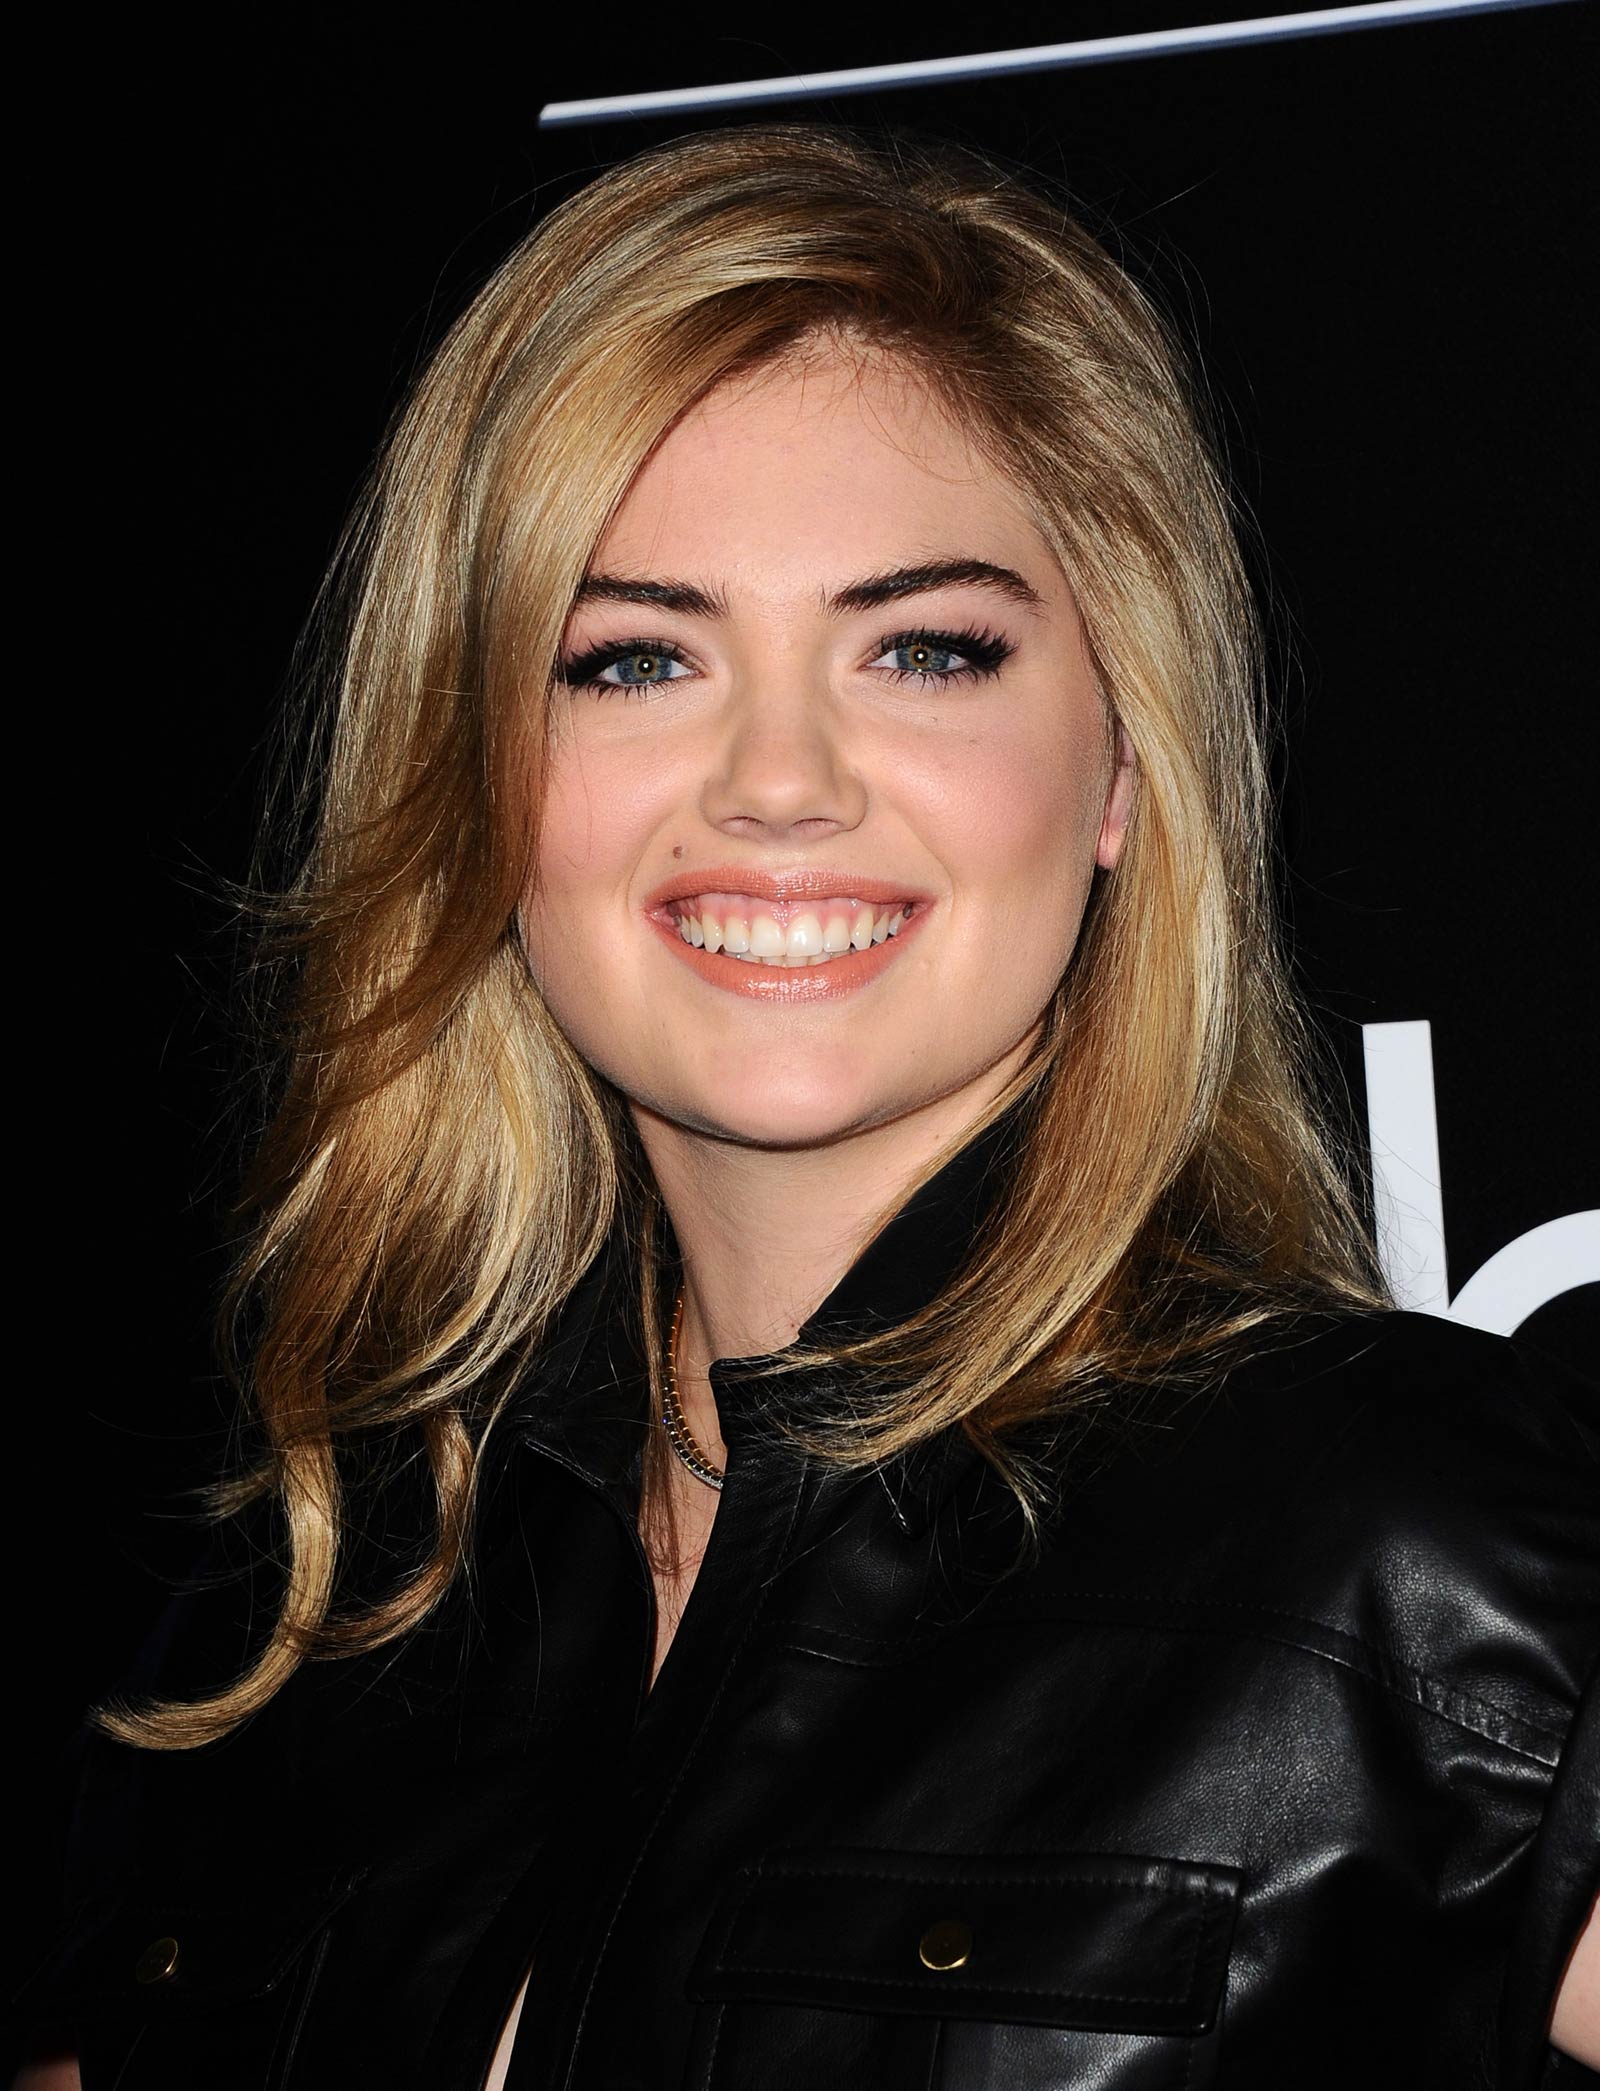 Kate Upton attends The PEOPLE Magazine Awards